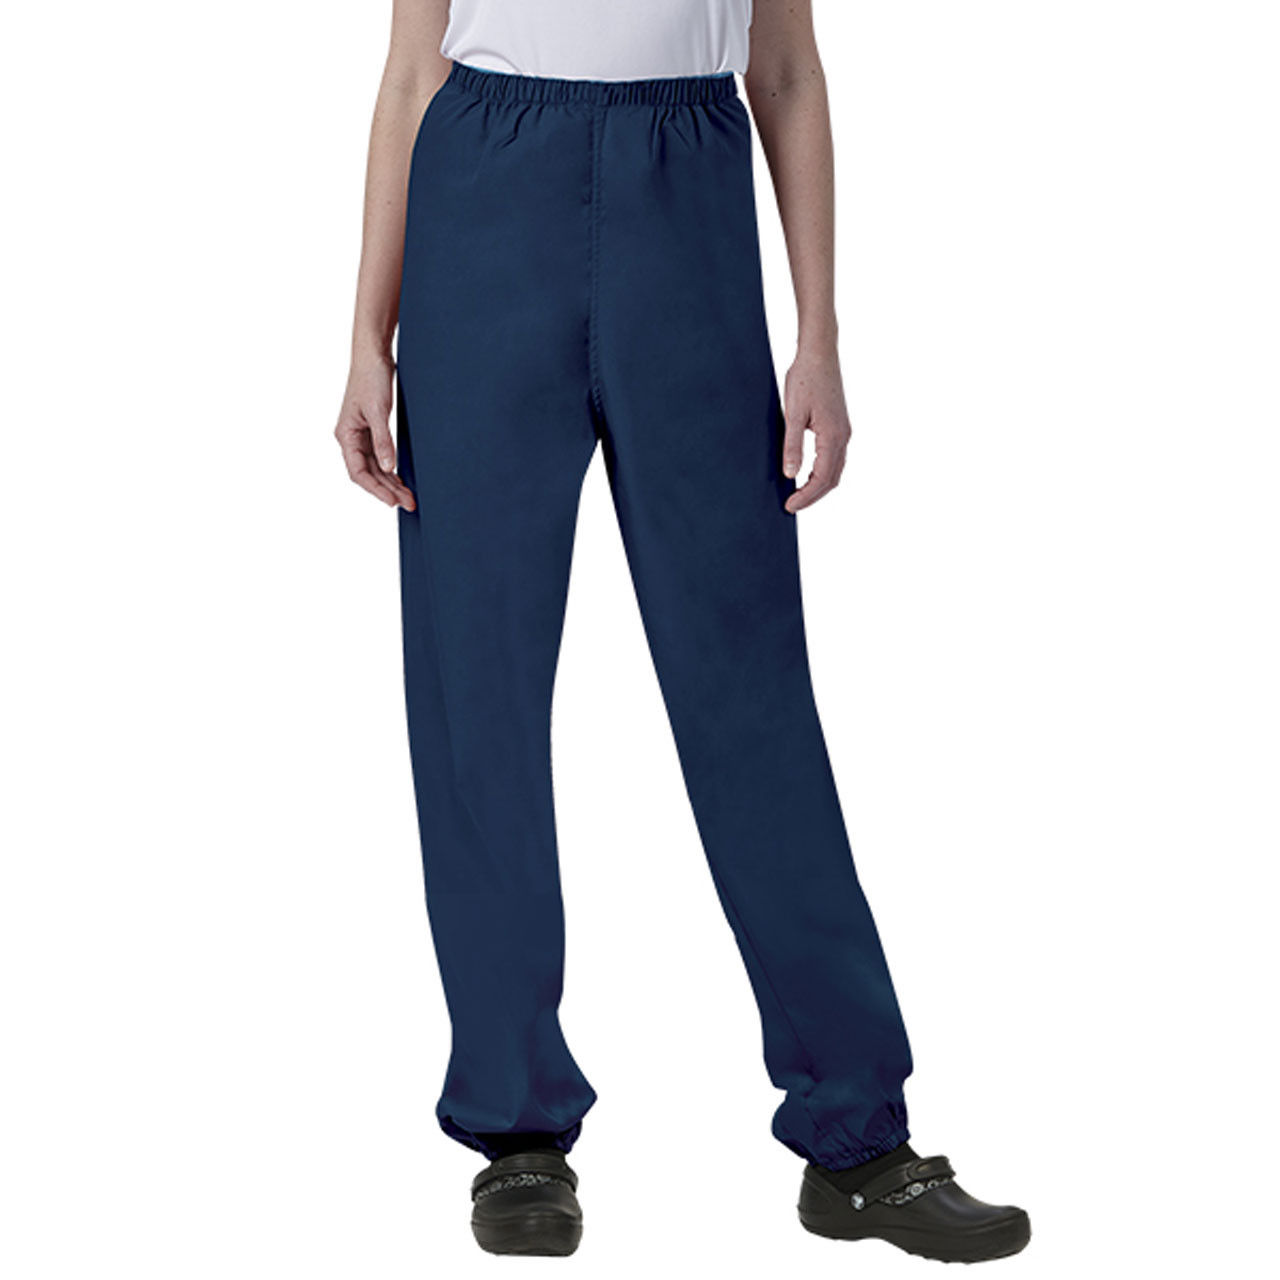 What material are the Fashion Seal healthcare scrub pants made of?